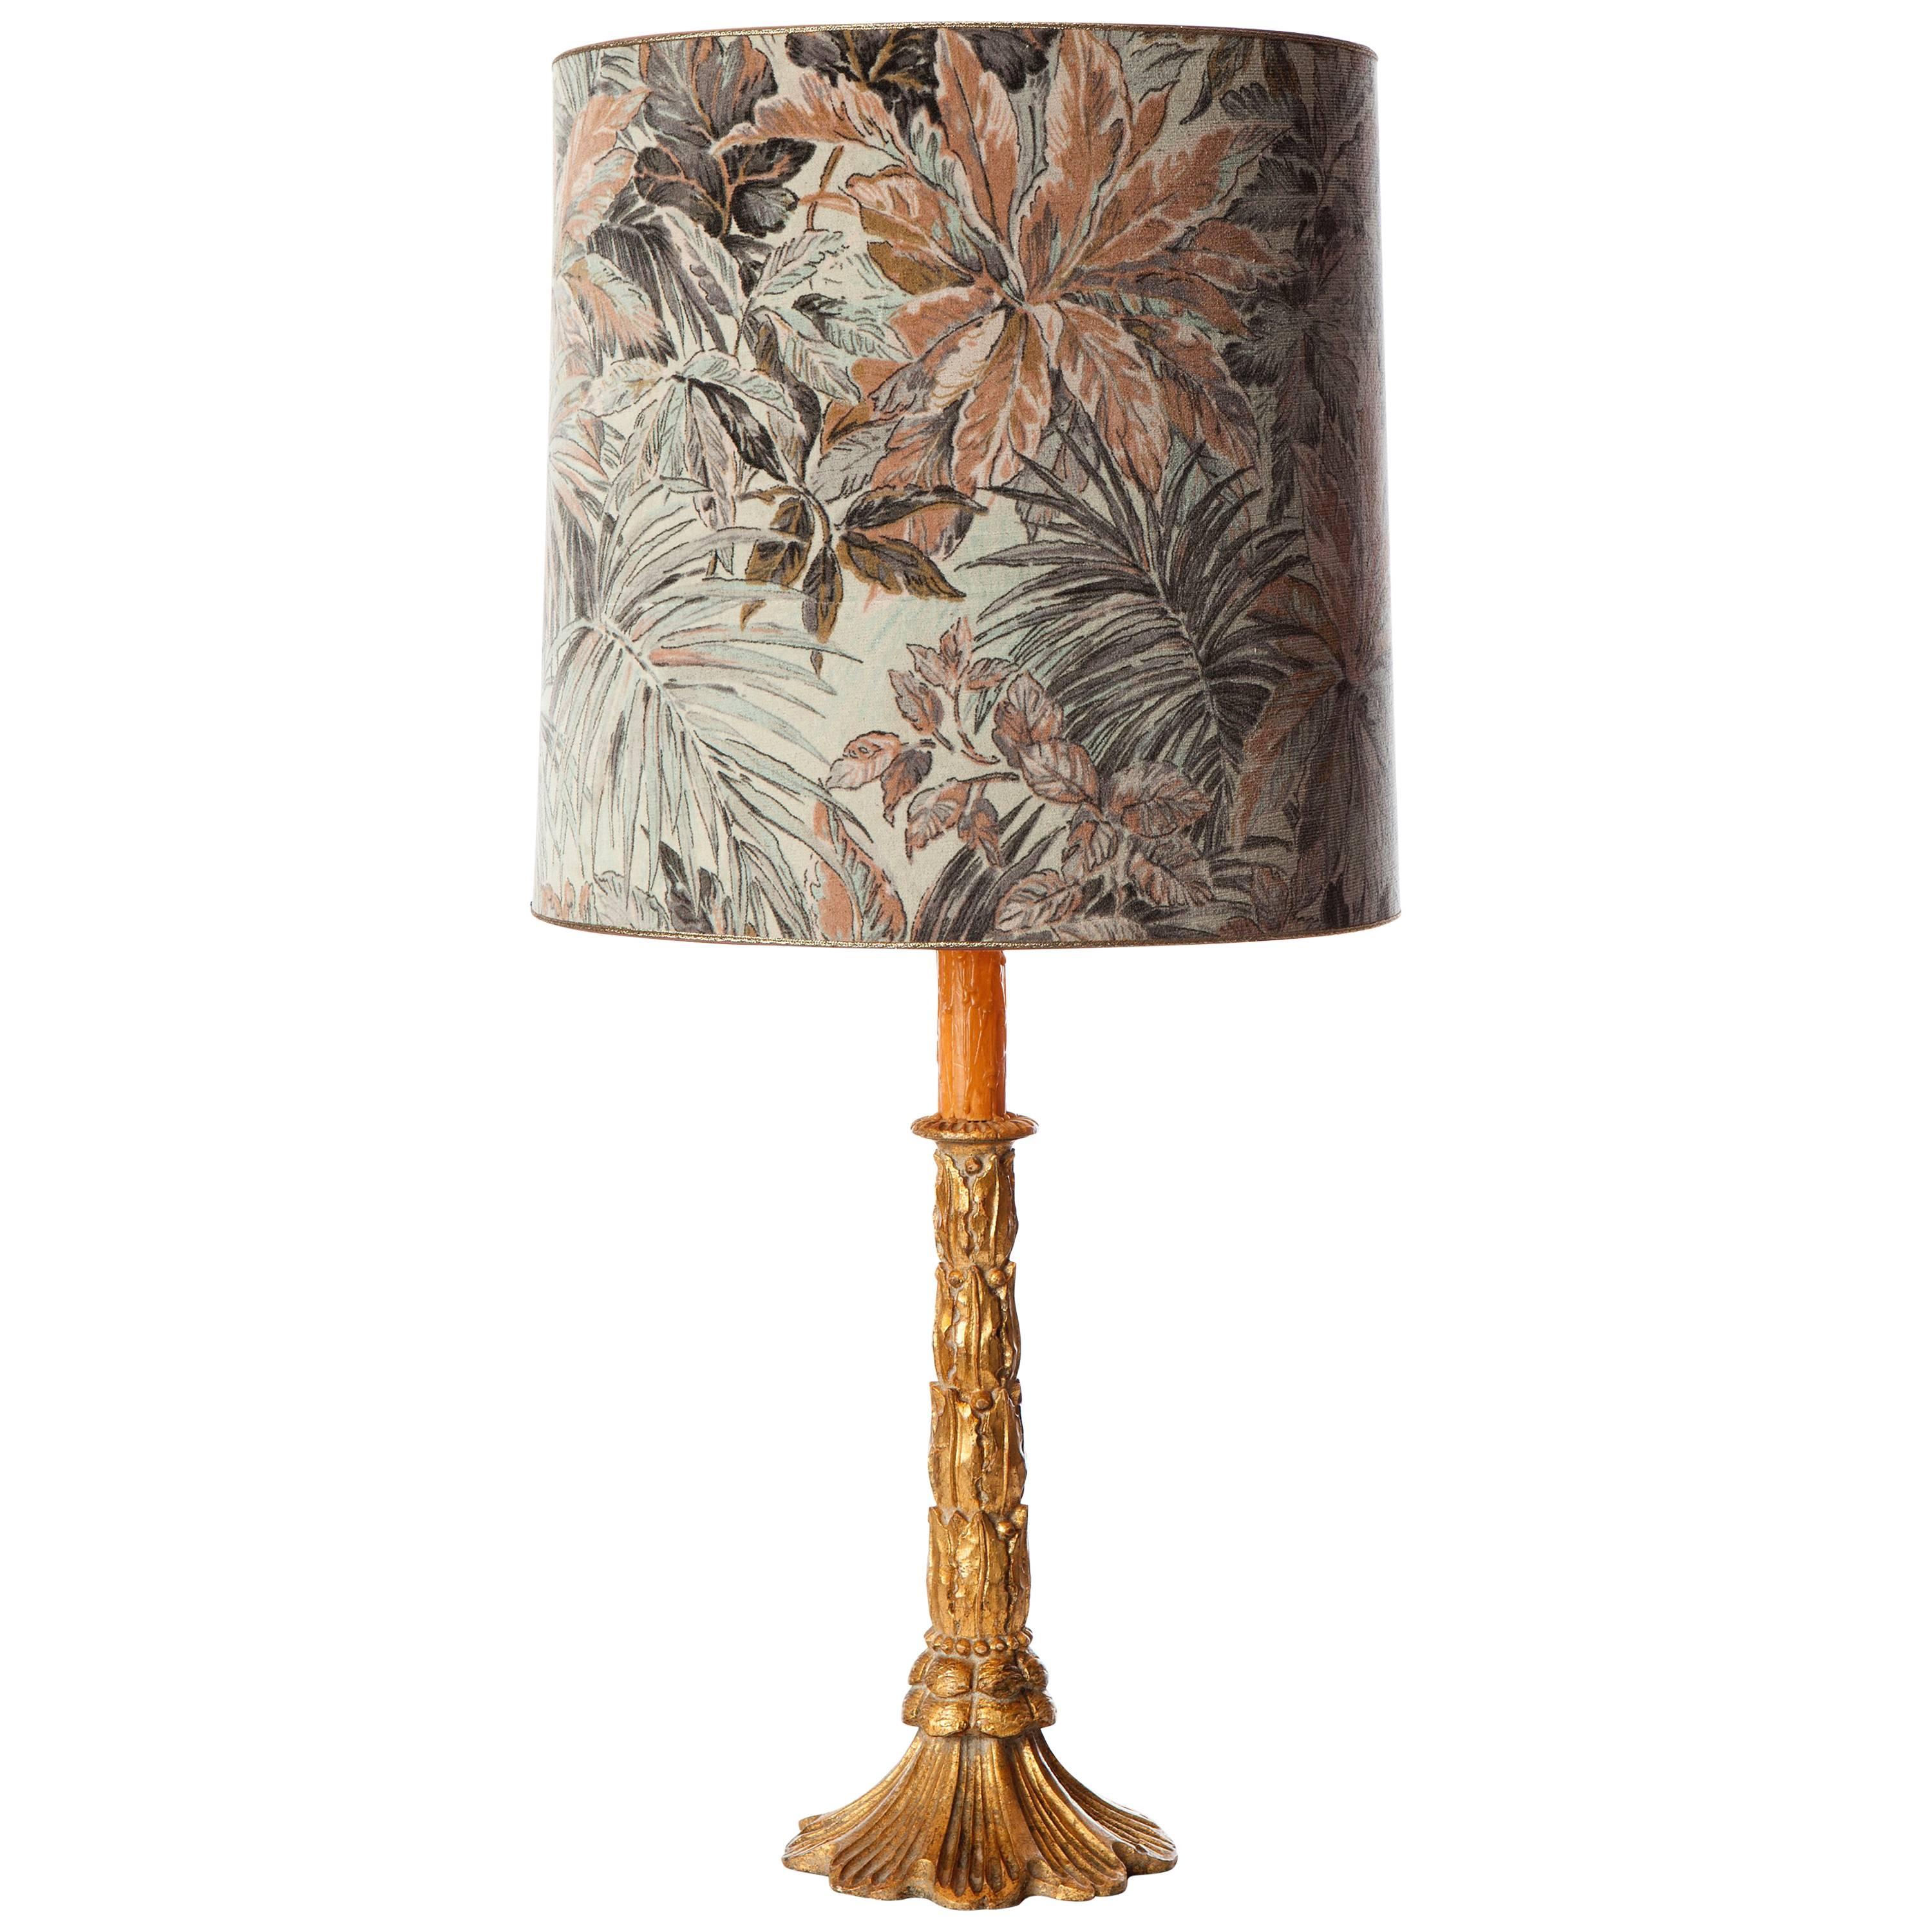 Gilted Wood Candlestick Table Lamp